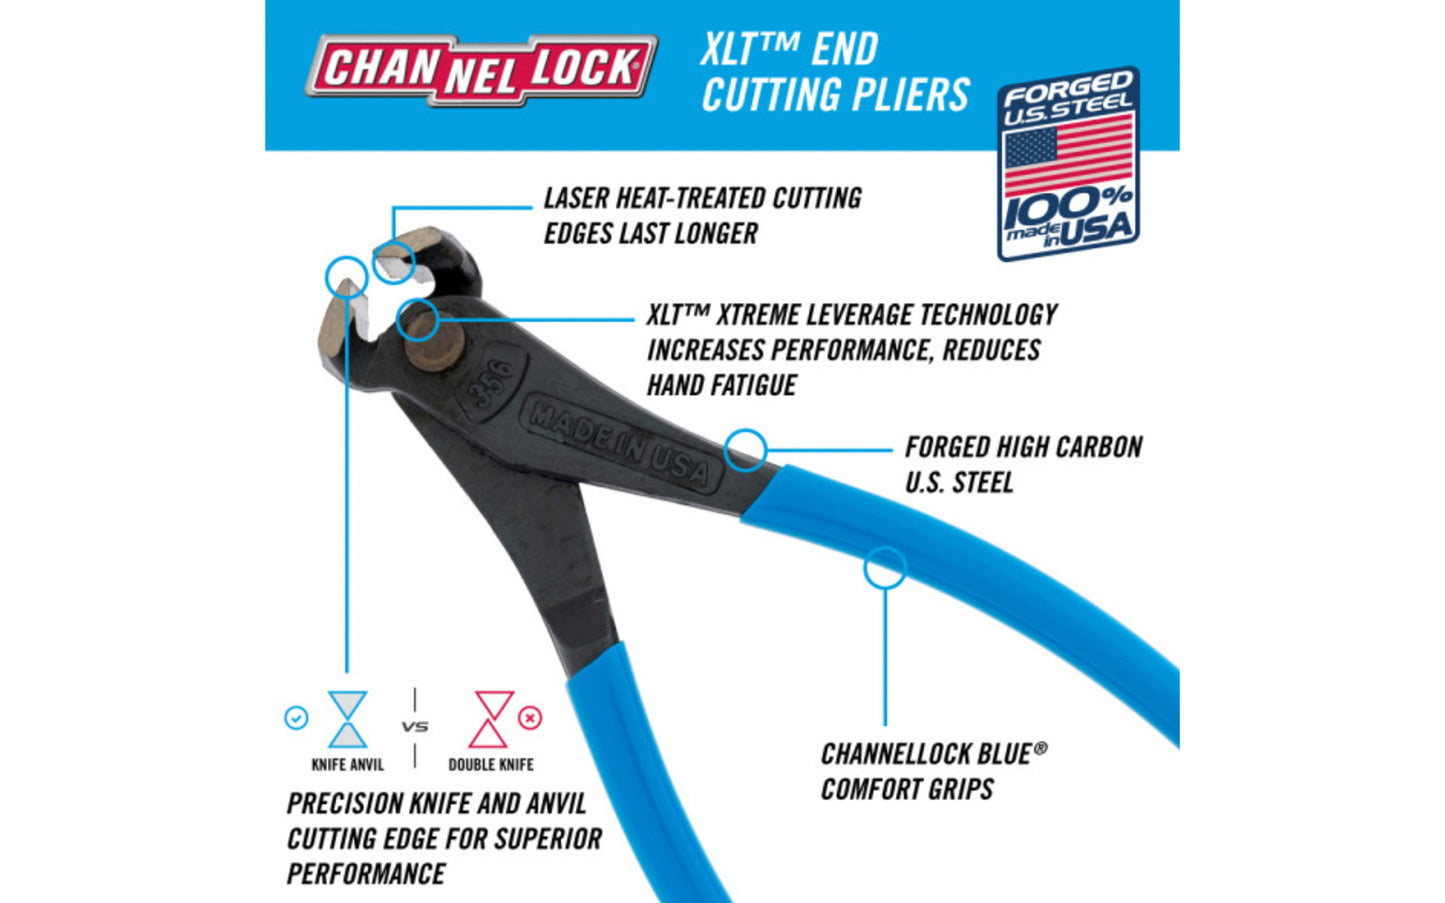 These 6" Channellock End Cutting Pliers have knife and anvil style cutting edges to ensure perfect mating and superior cutting edge life. Forged high carbon U.S. steel for strength & durability is specially coated for ultimate rust prevention. End nippers. Channelock Model 356. Made in USA.